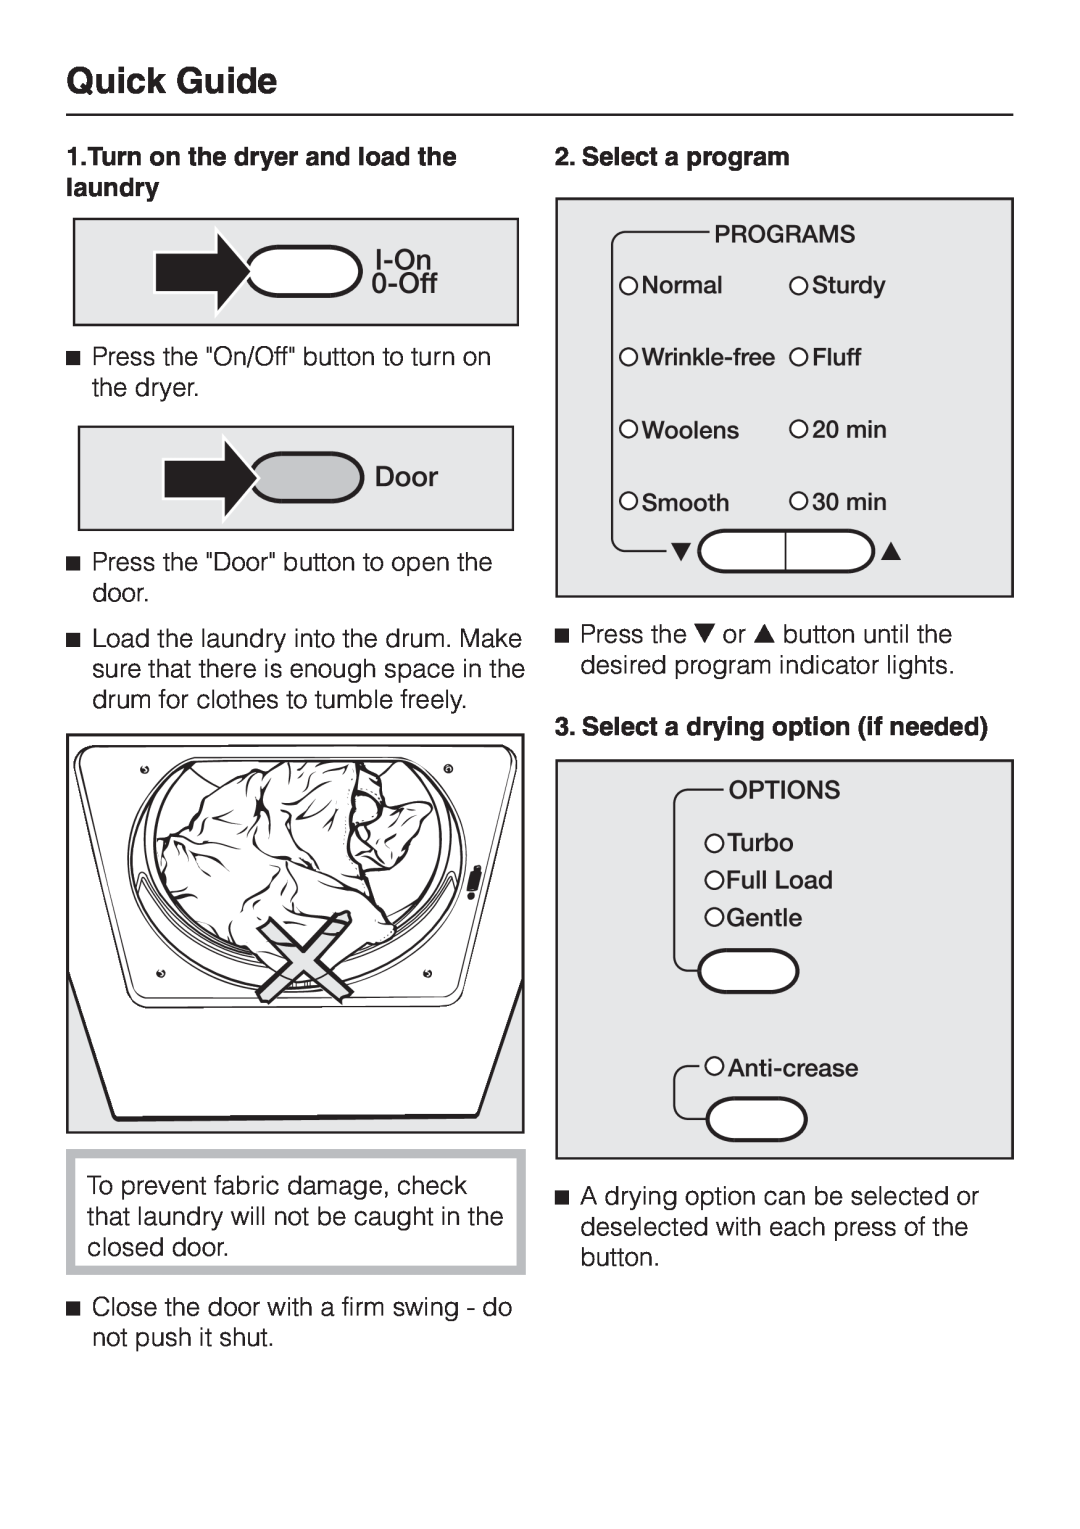 Miele T 1413 T 1415 operating instructions Quick Guide, Turn on the dryer and load the laundry, Select a program 